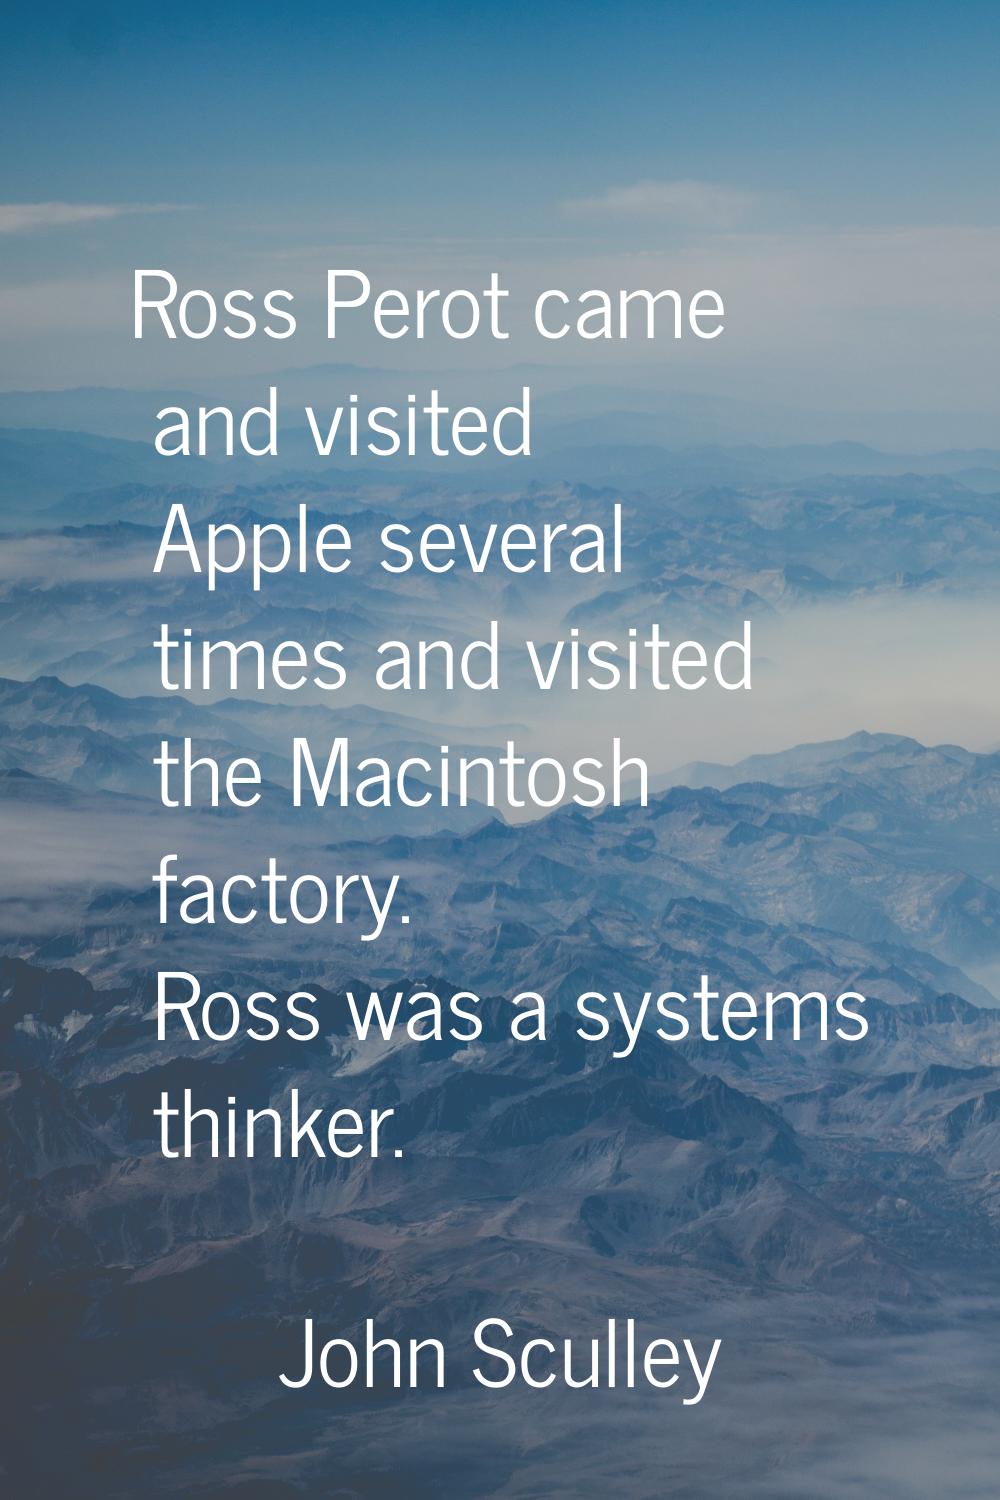 Ross Perot came and visited Apple several times and visited the Macintosh factory. Ross was a syste